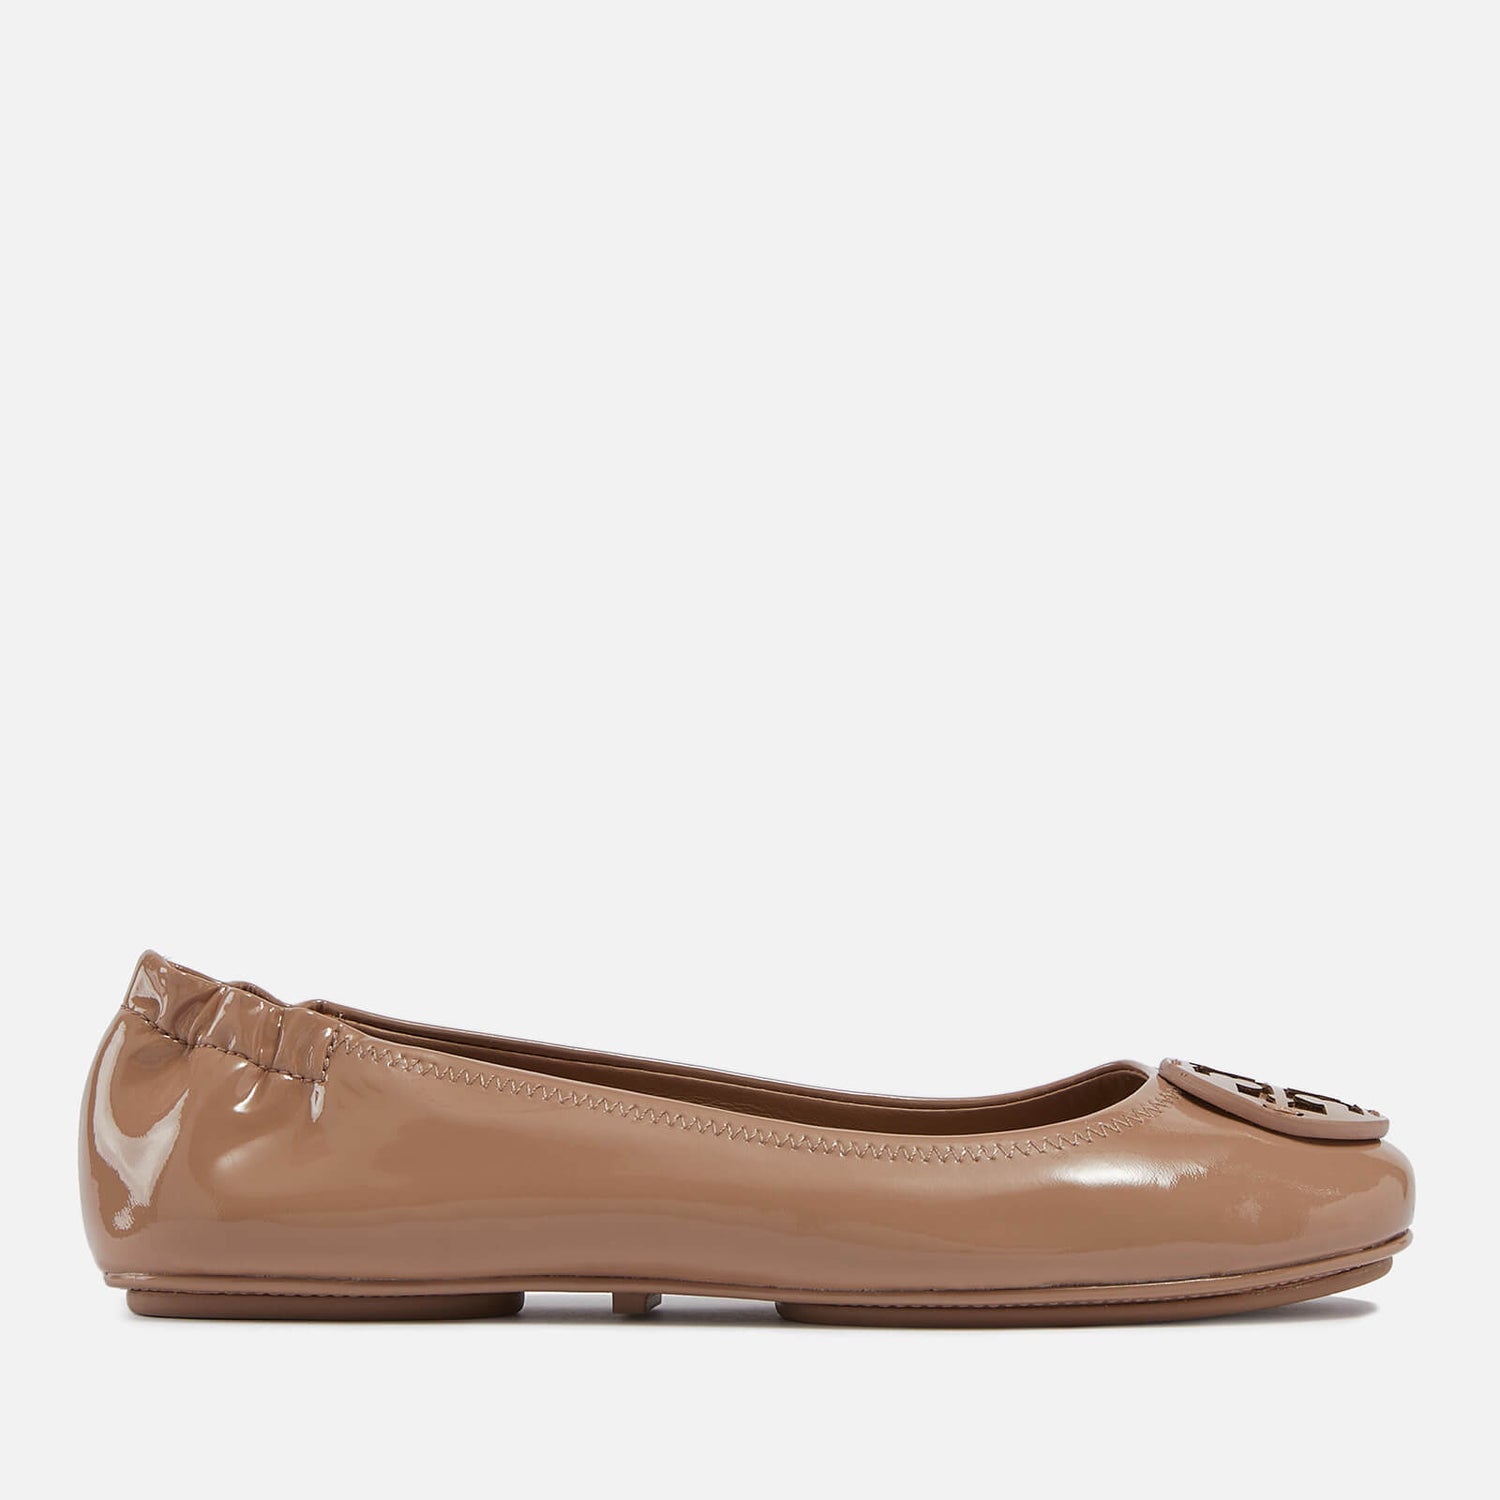 Tory Burch Minnie Patent Leather Travel Ballet Flats - UK 3